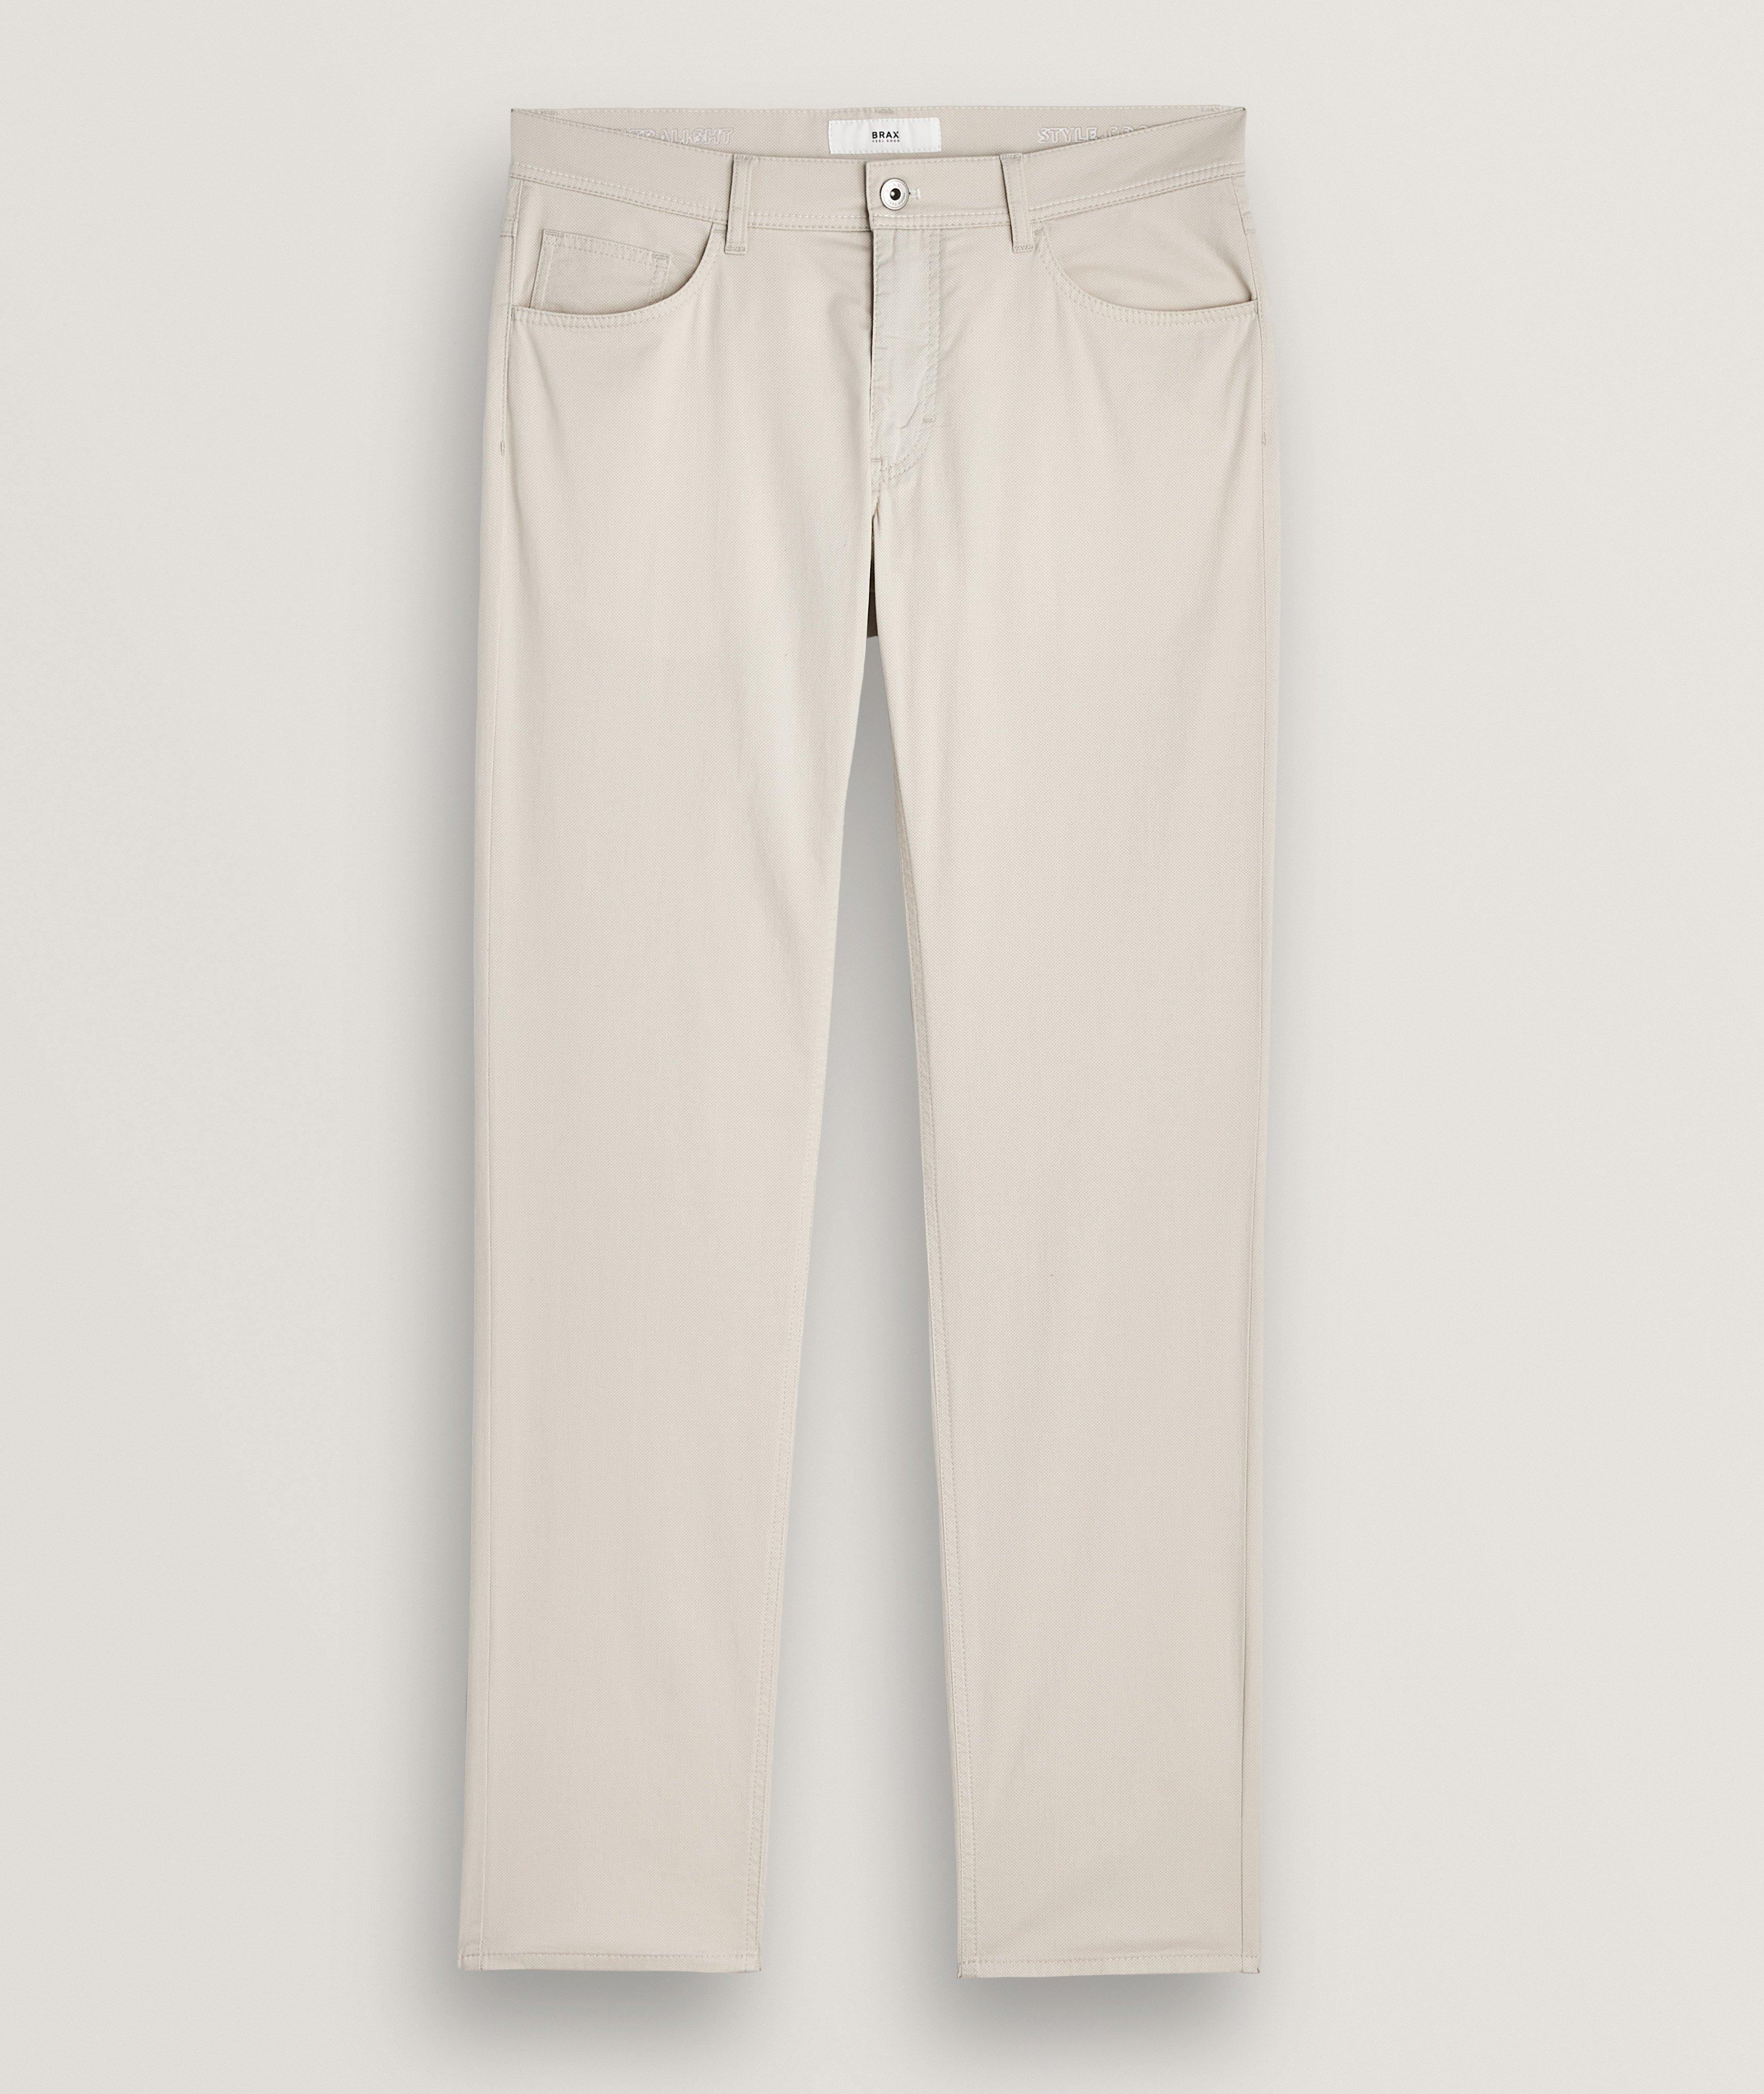 Cooper Ultralight Neat Sustainable Stretch-Cotton Pants  image 0